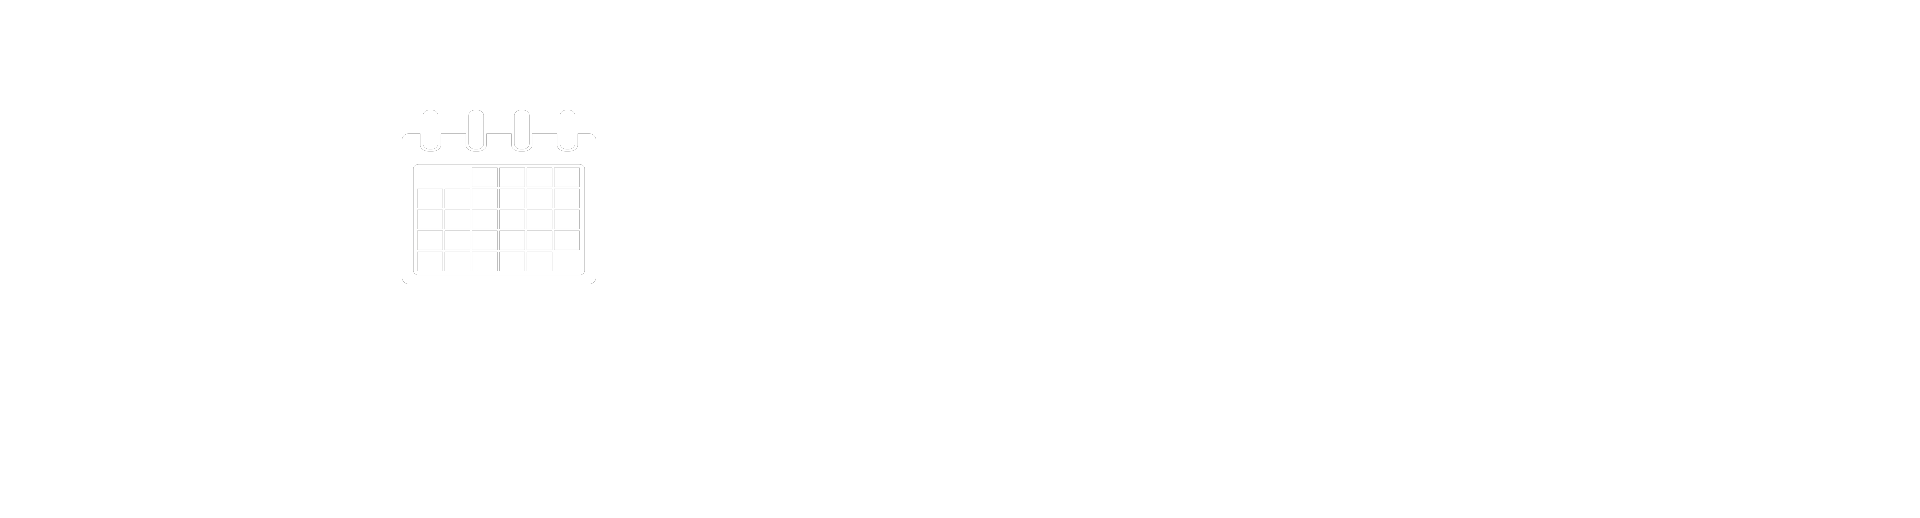 EVENTS: get out there & get involved